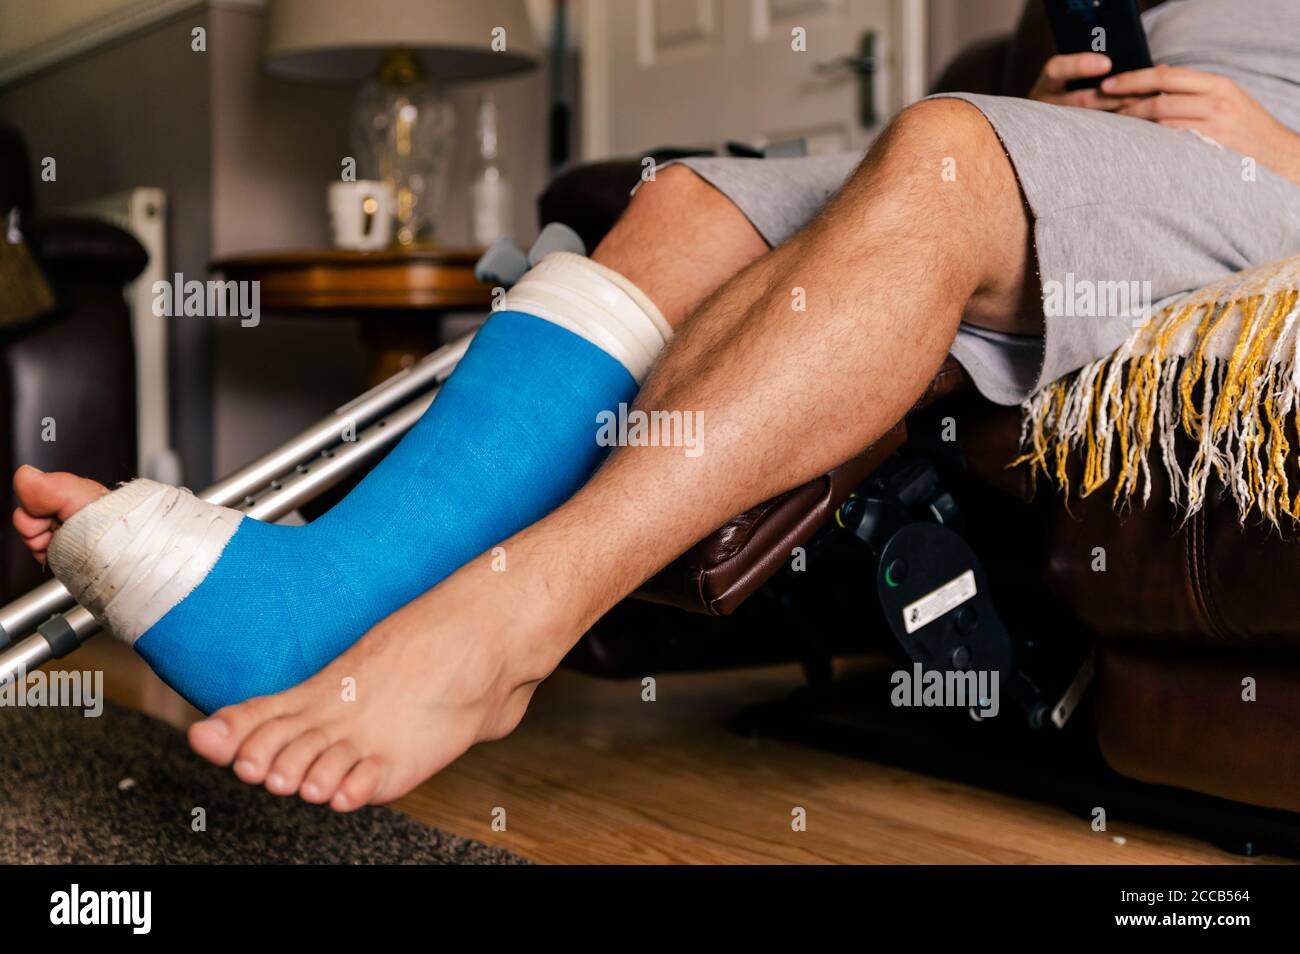 Male sat on sofa on phone with blue cast on leg.fifth metatarsal surgery. Stock Photo